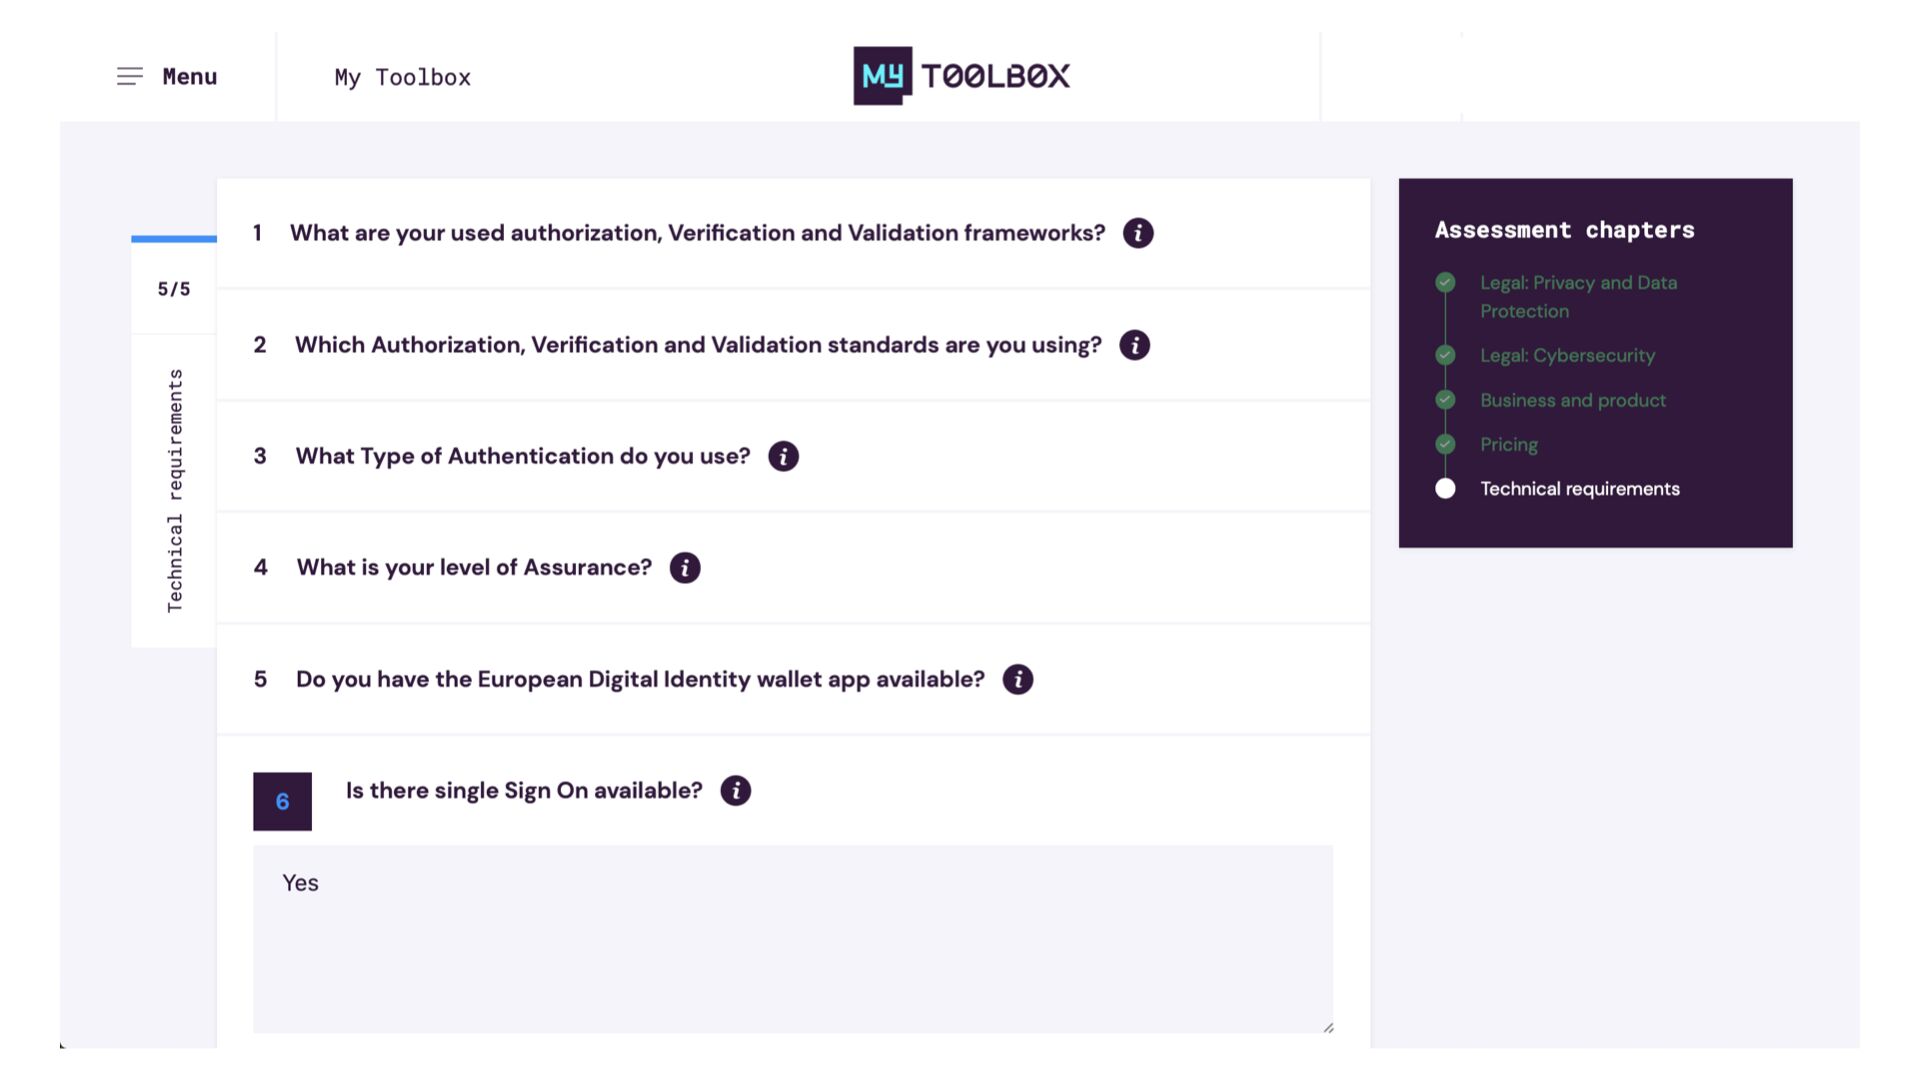 The assessment in the Digital Toolbox